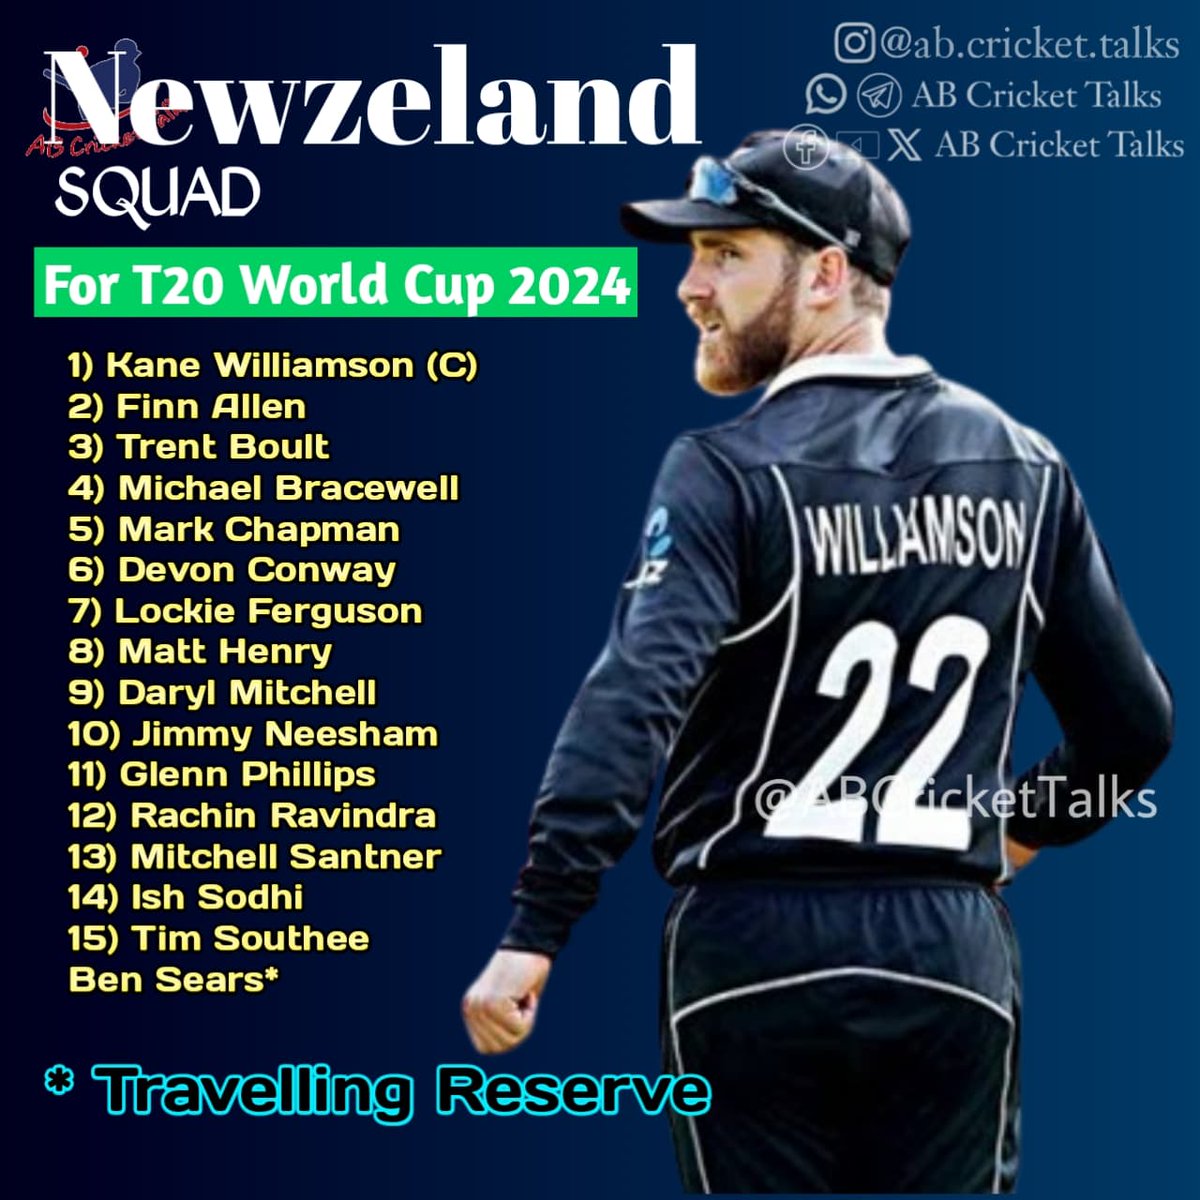 Newzeland announce there squad For the T20 World Cup 2024
#ABCricketTalks #CricketTalksWithArpit 

#NewZealand #Newzelandcricket #icc #T20WorldCup2024 #worldcup #QueenOfTears #bbtvi #CSKvSRH